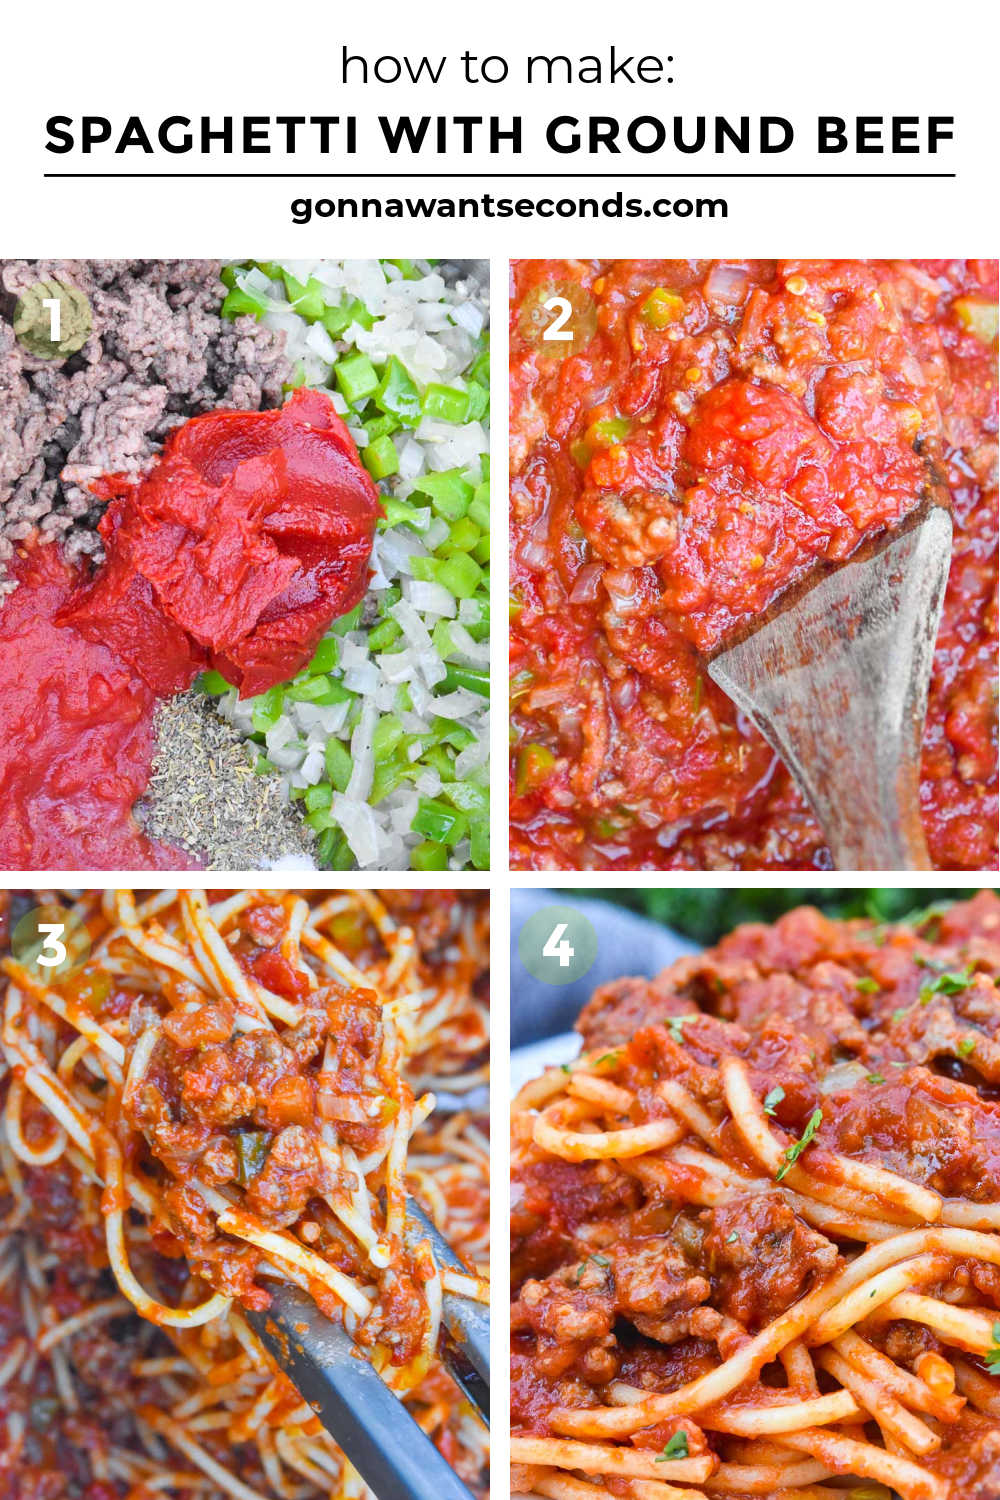 Step by step how to make spaghetti recipe with ground beef